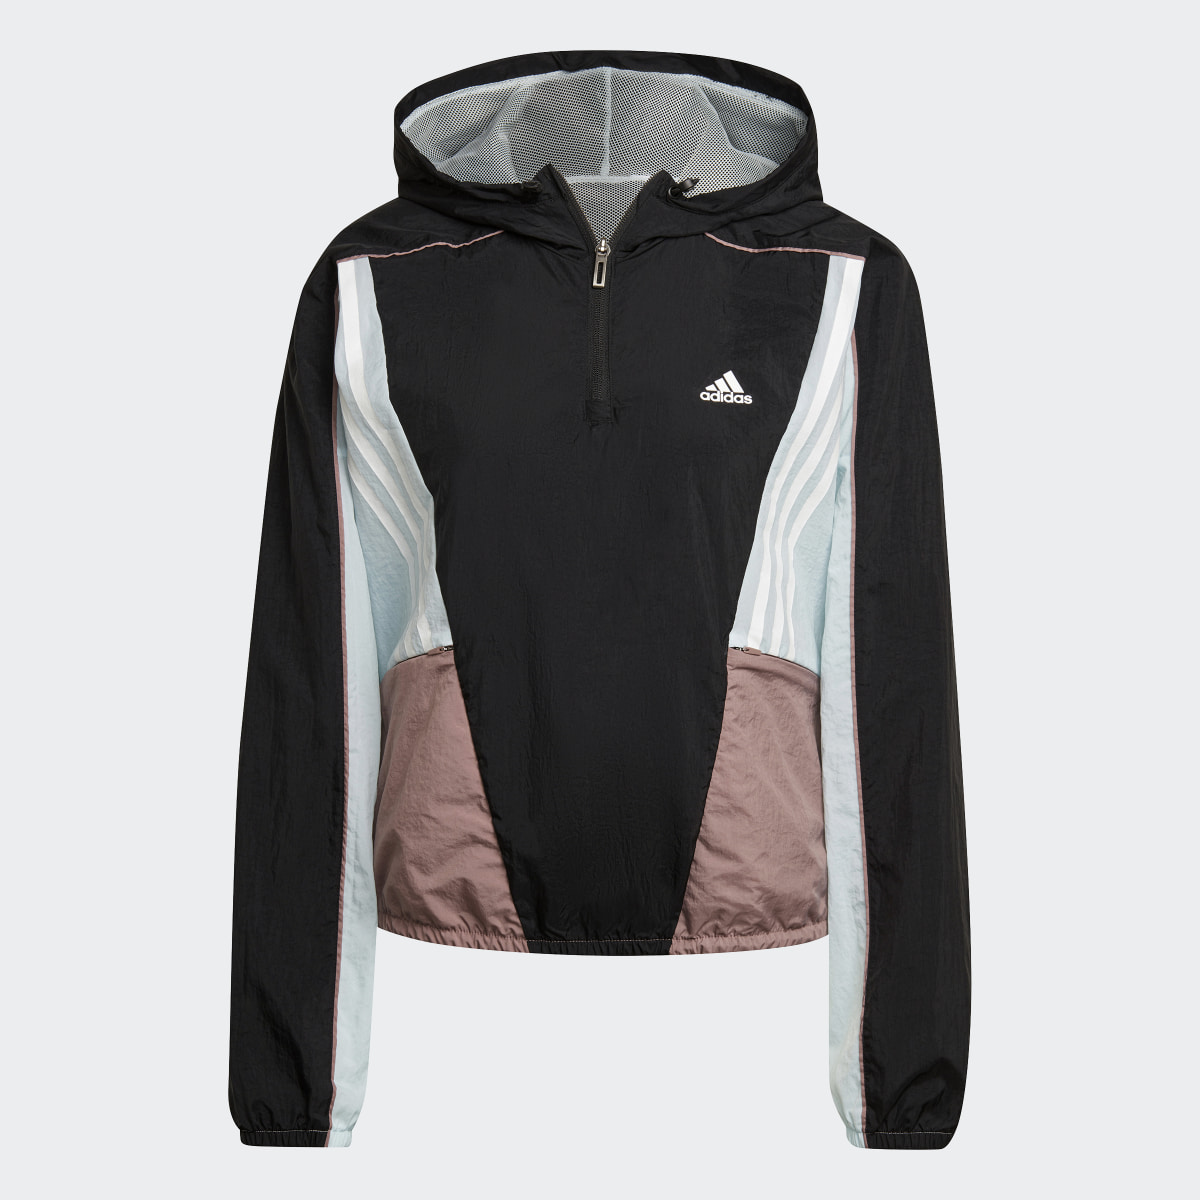 Adidas Hyperglam Hooded Track Top. 5